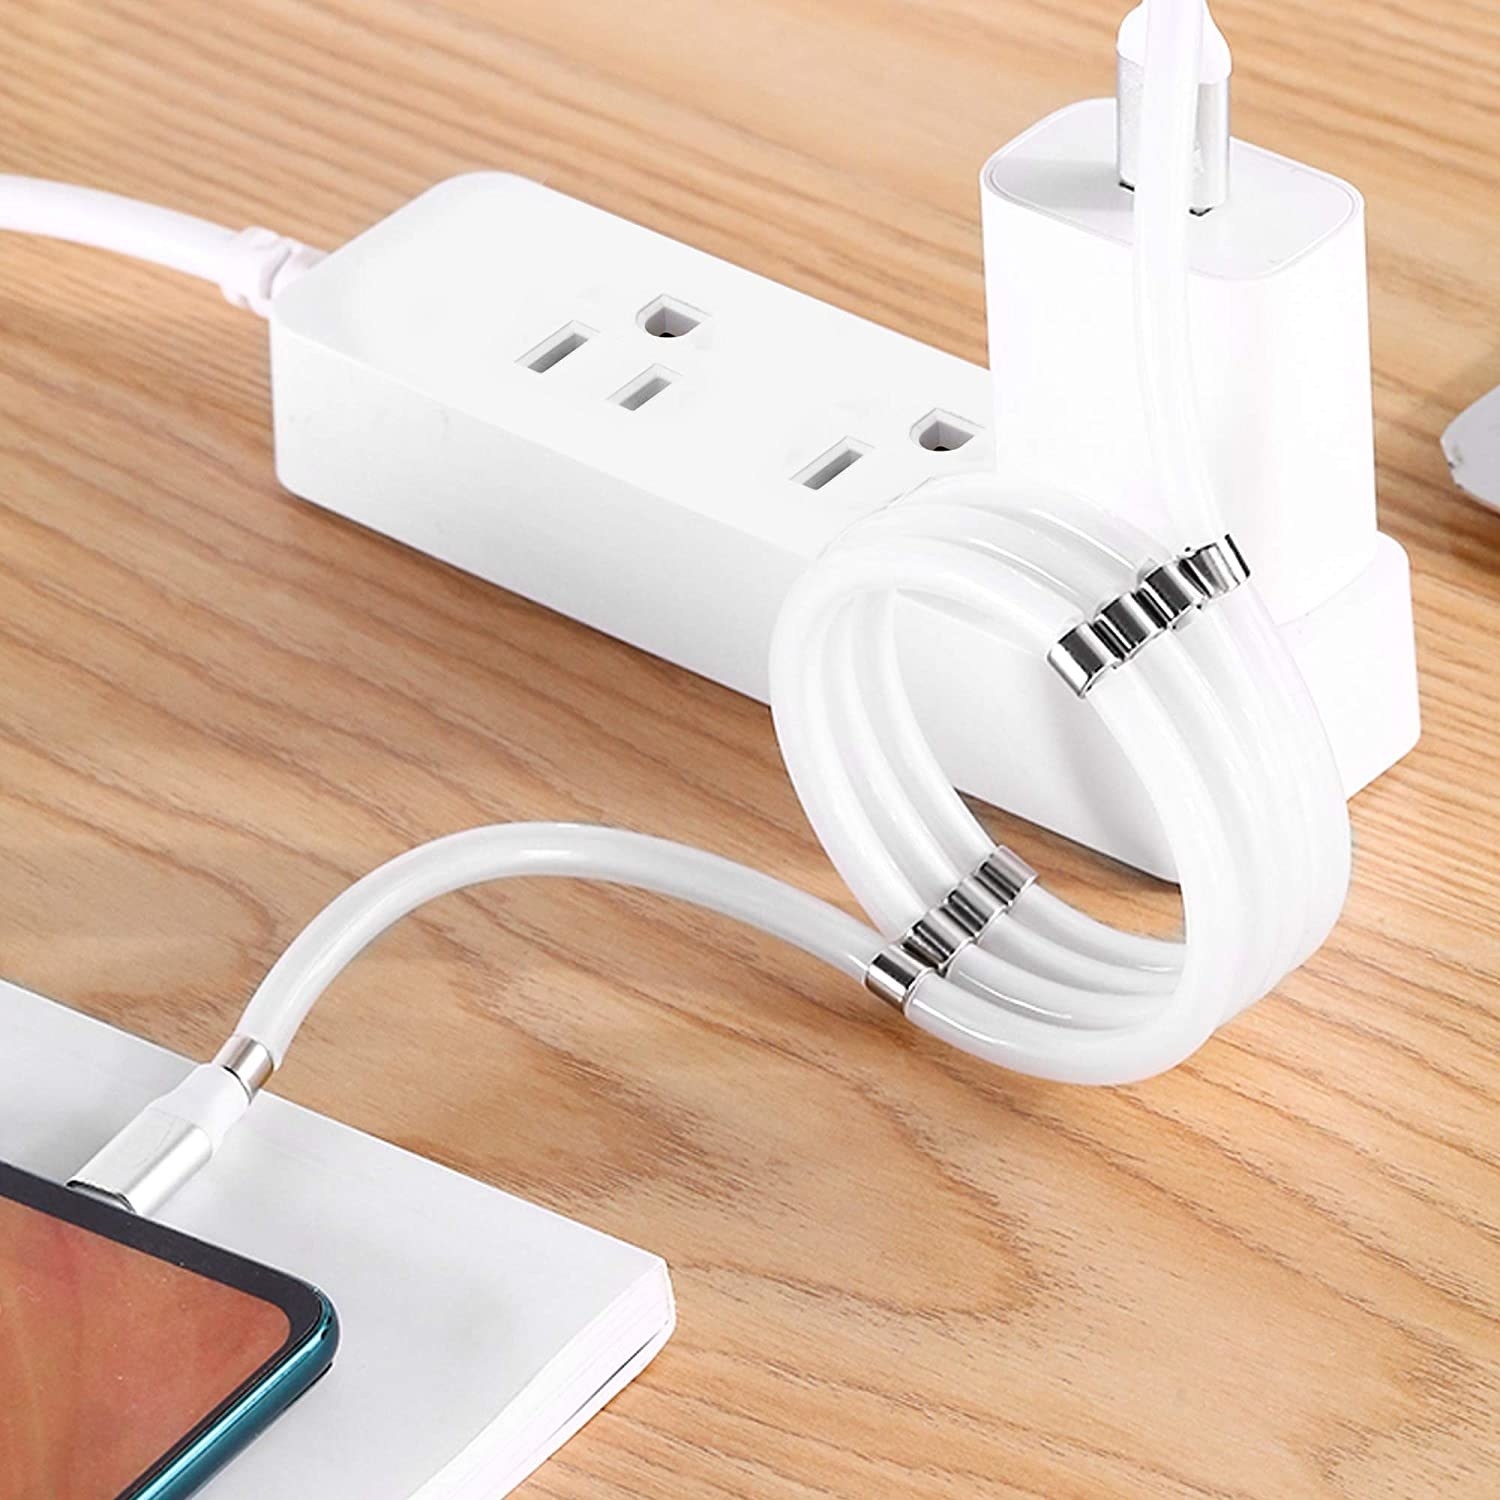 a magnetic charging cable that wound itself into a neat coil